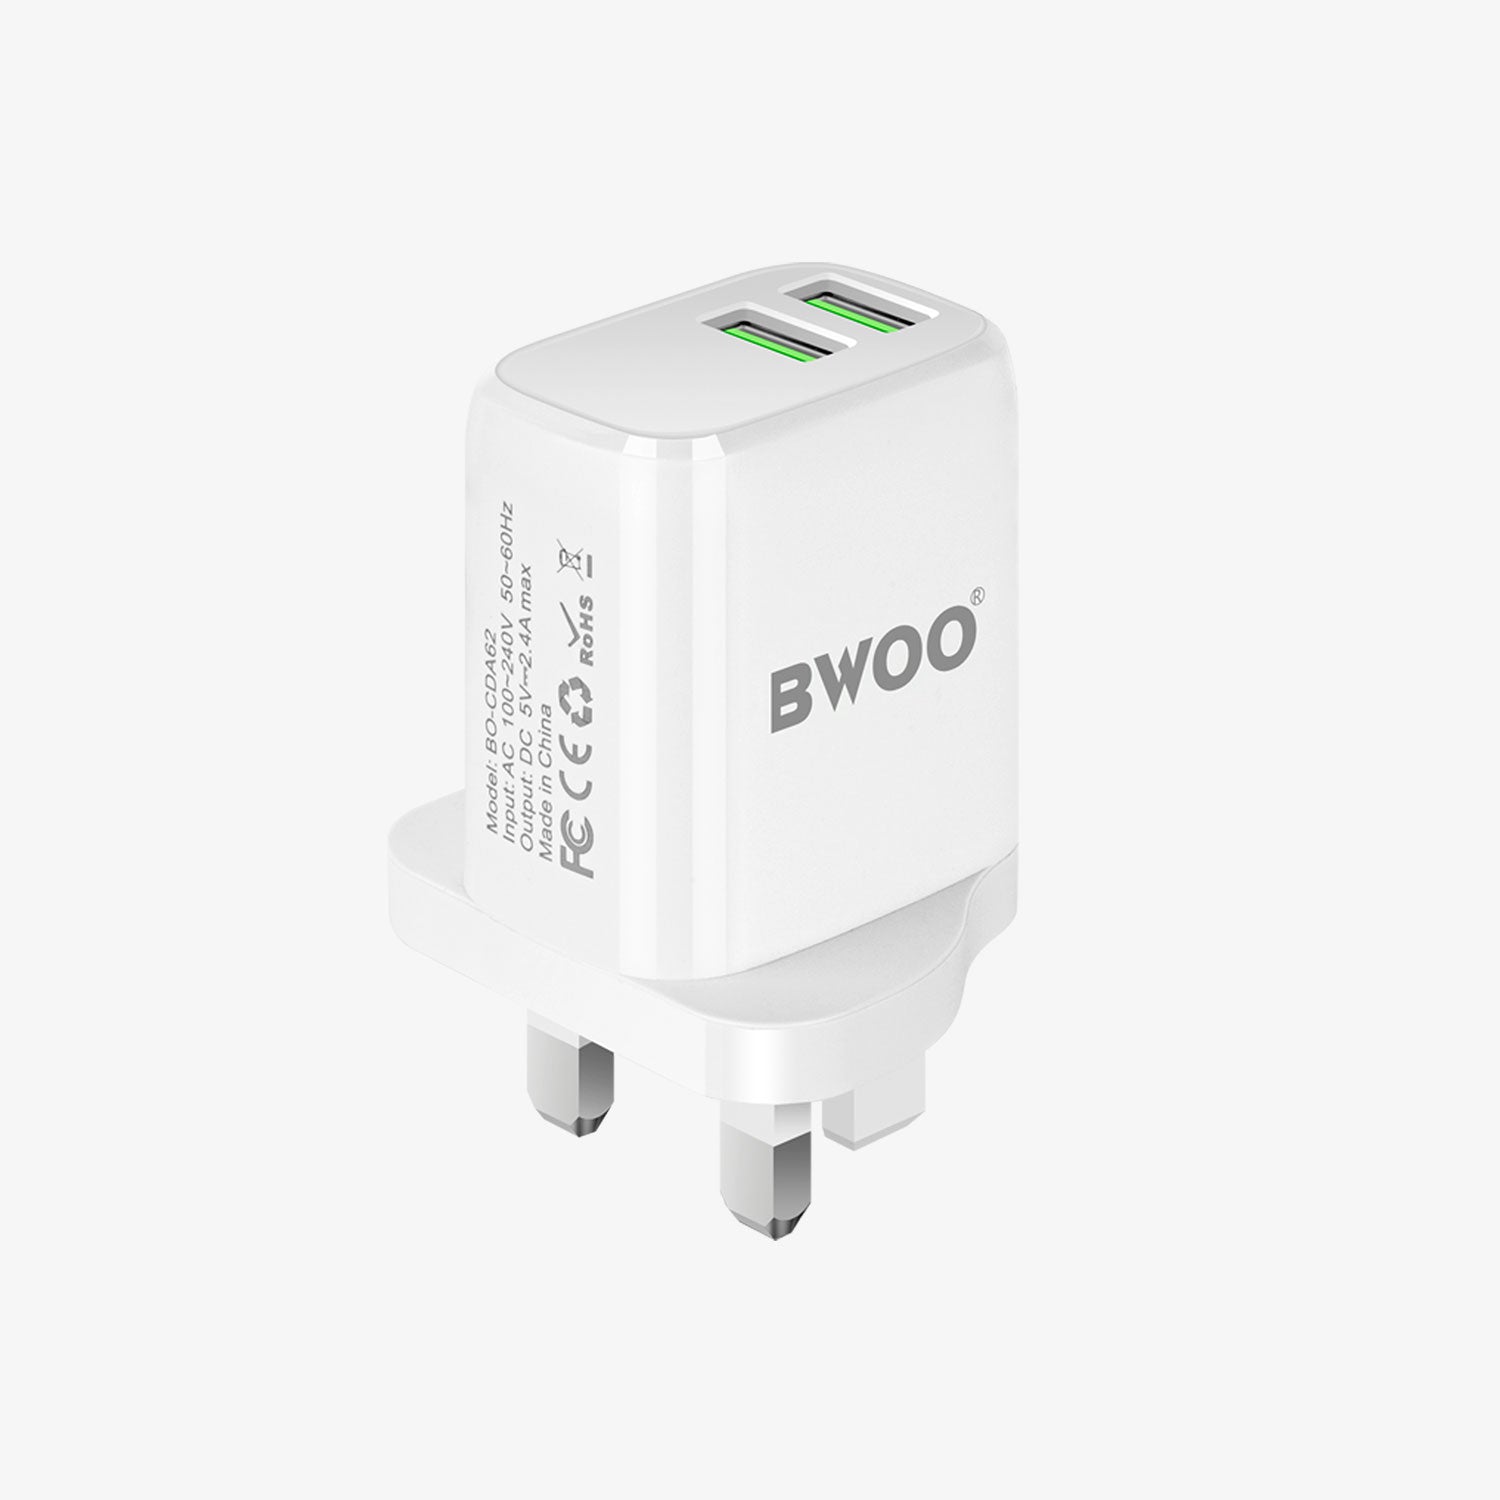 BWOO 2 USB Fast Charger with Cable